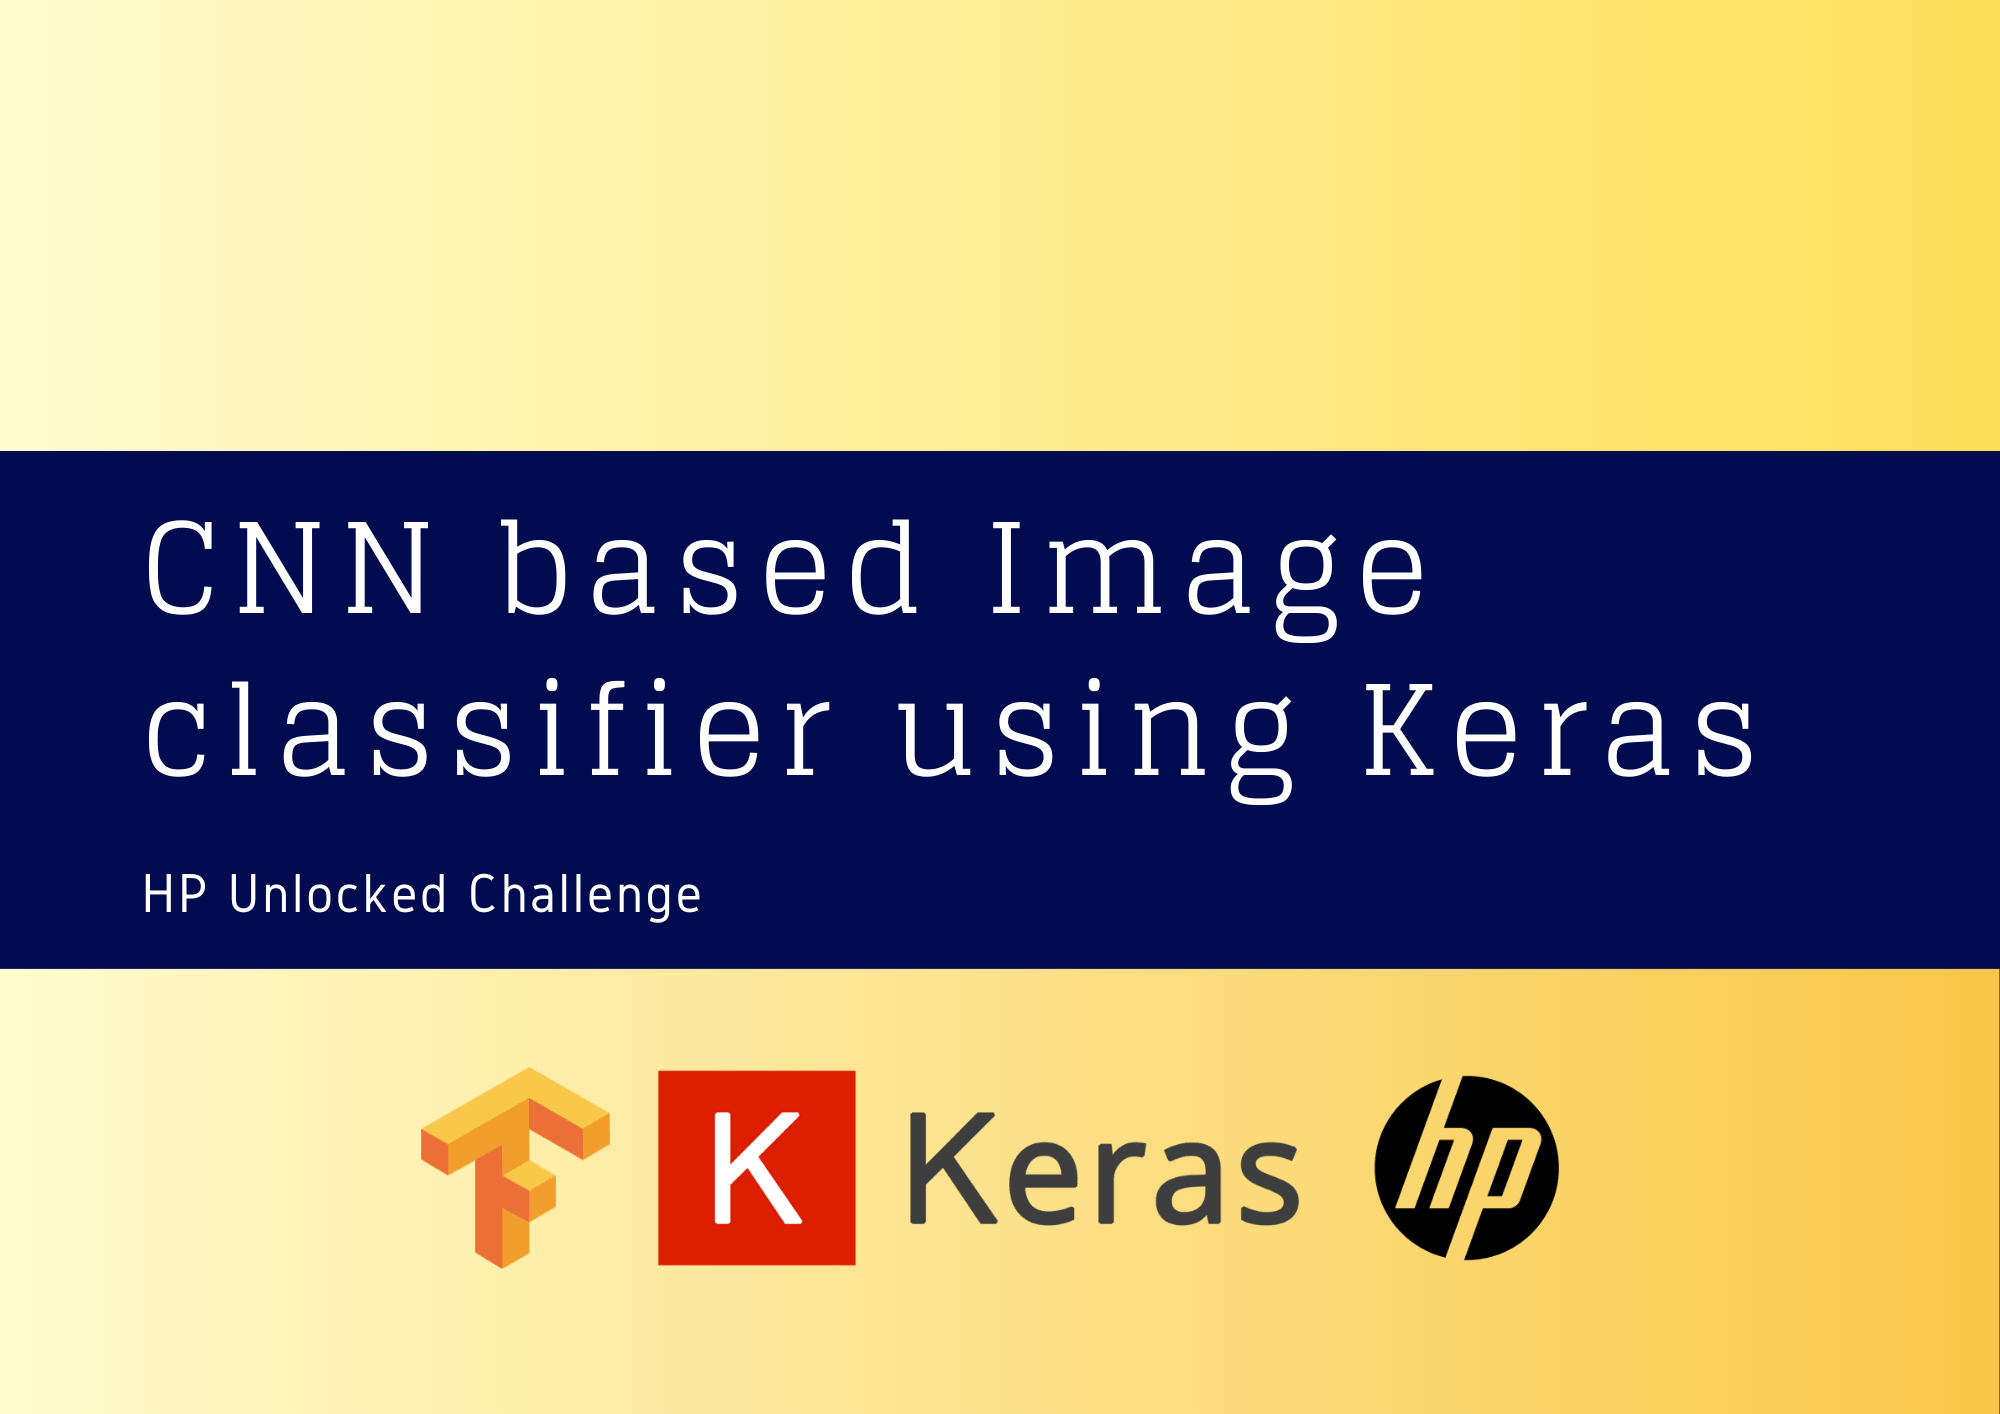 How to build a simple CNN based Image classifier using Keras